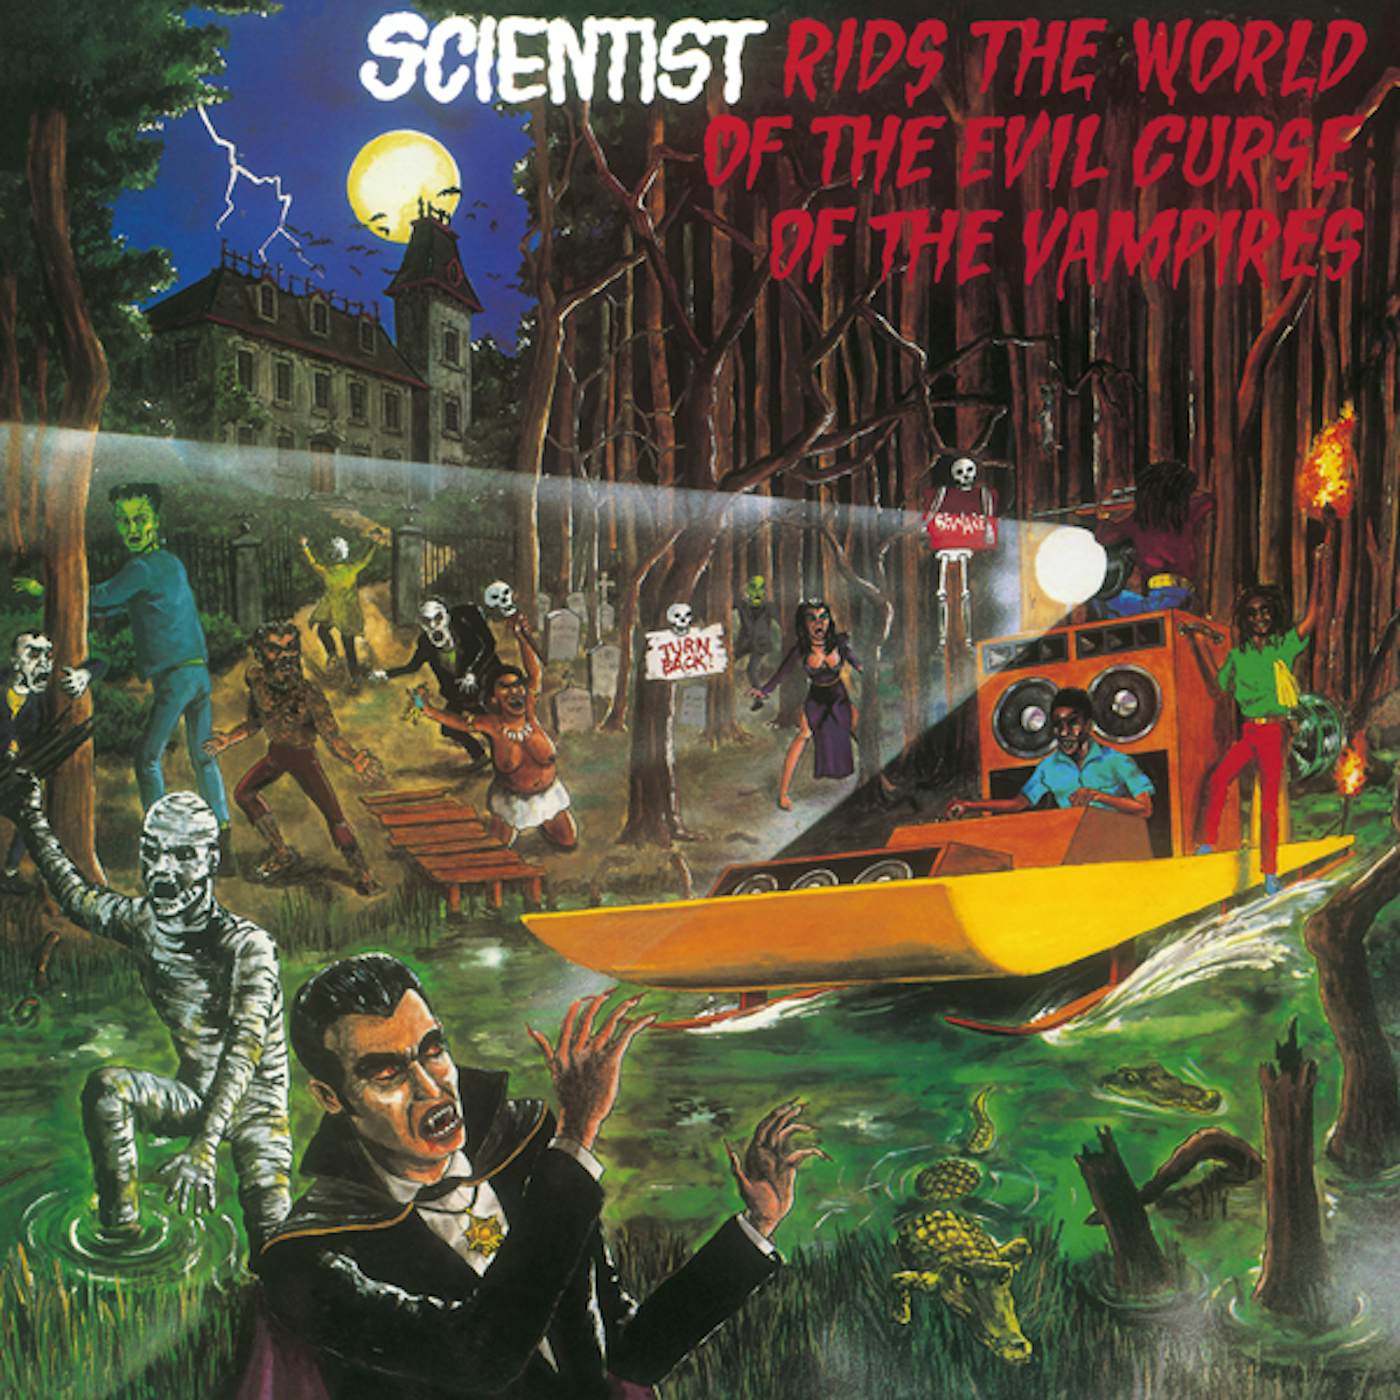 Scientist RIDS THE WORLD OF THE EVIL CURSE OF THE VAMPIRES CD